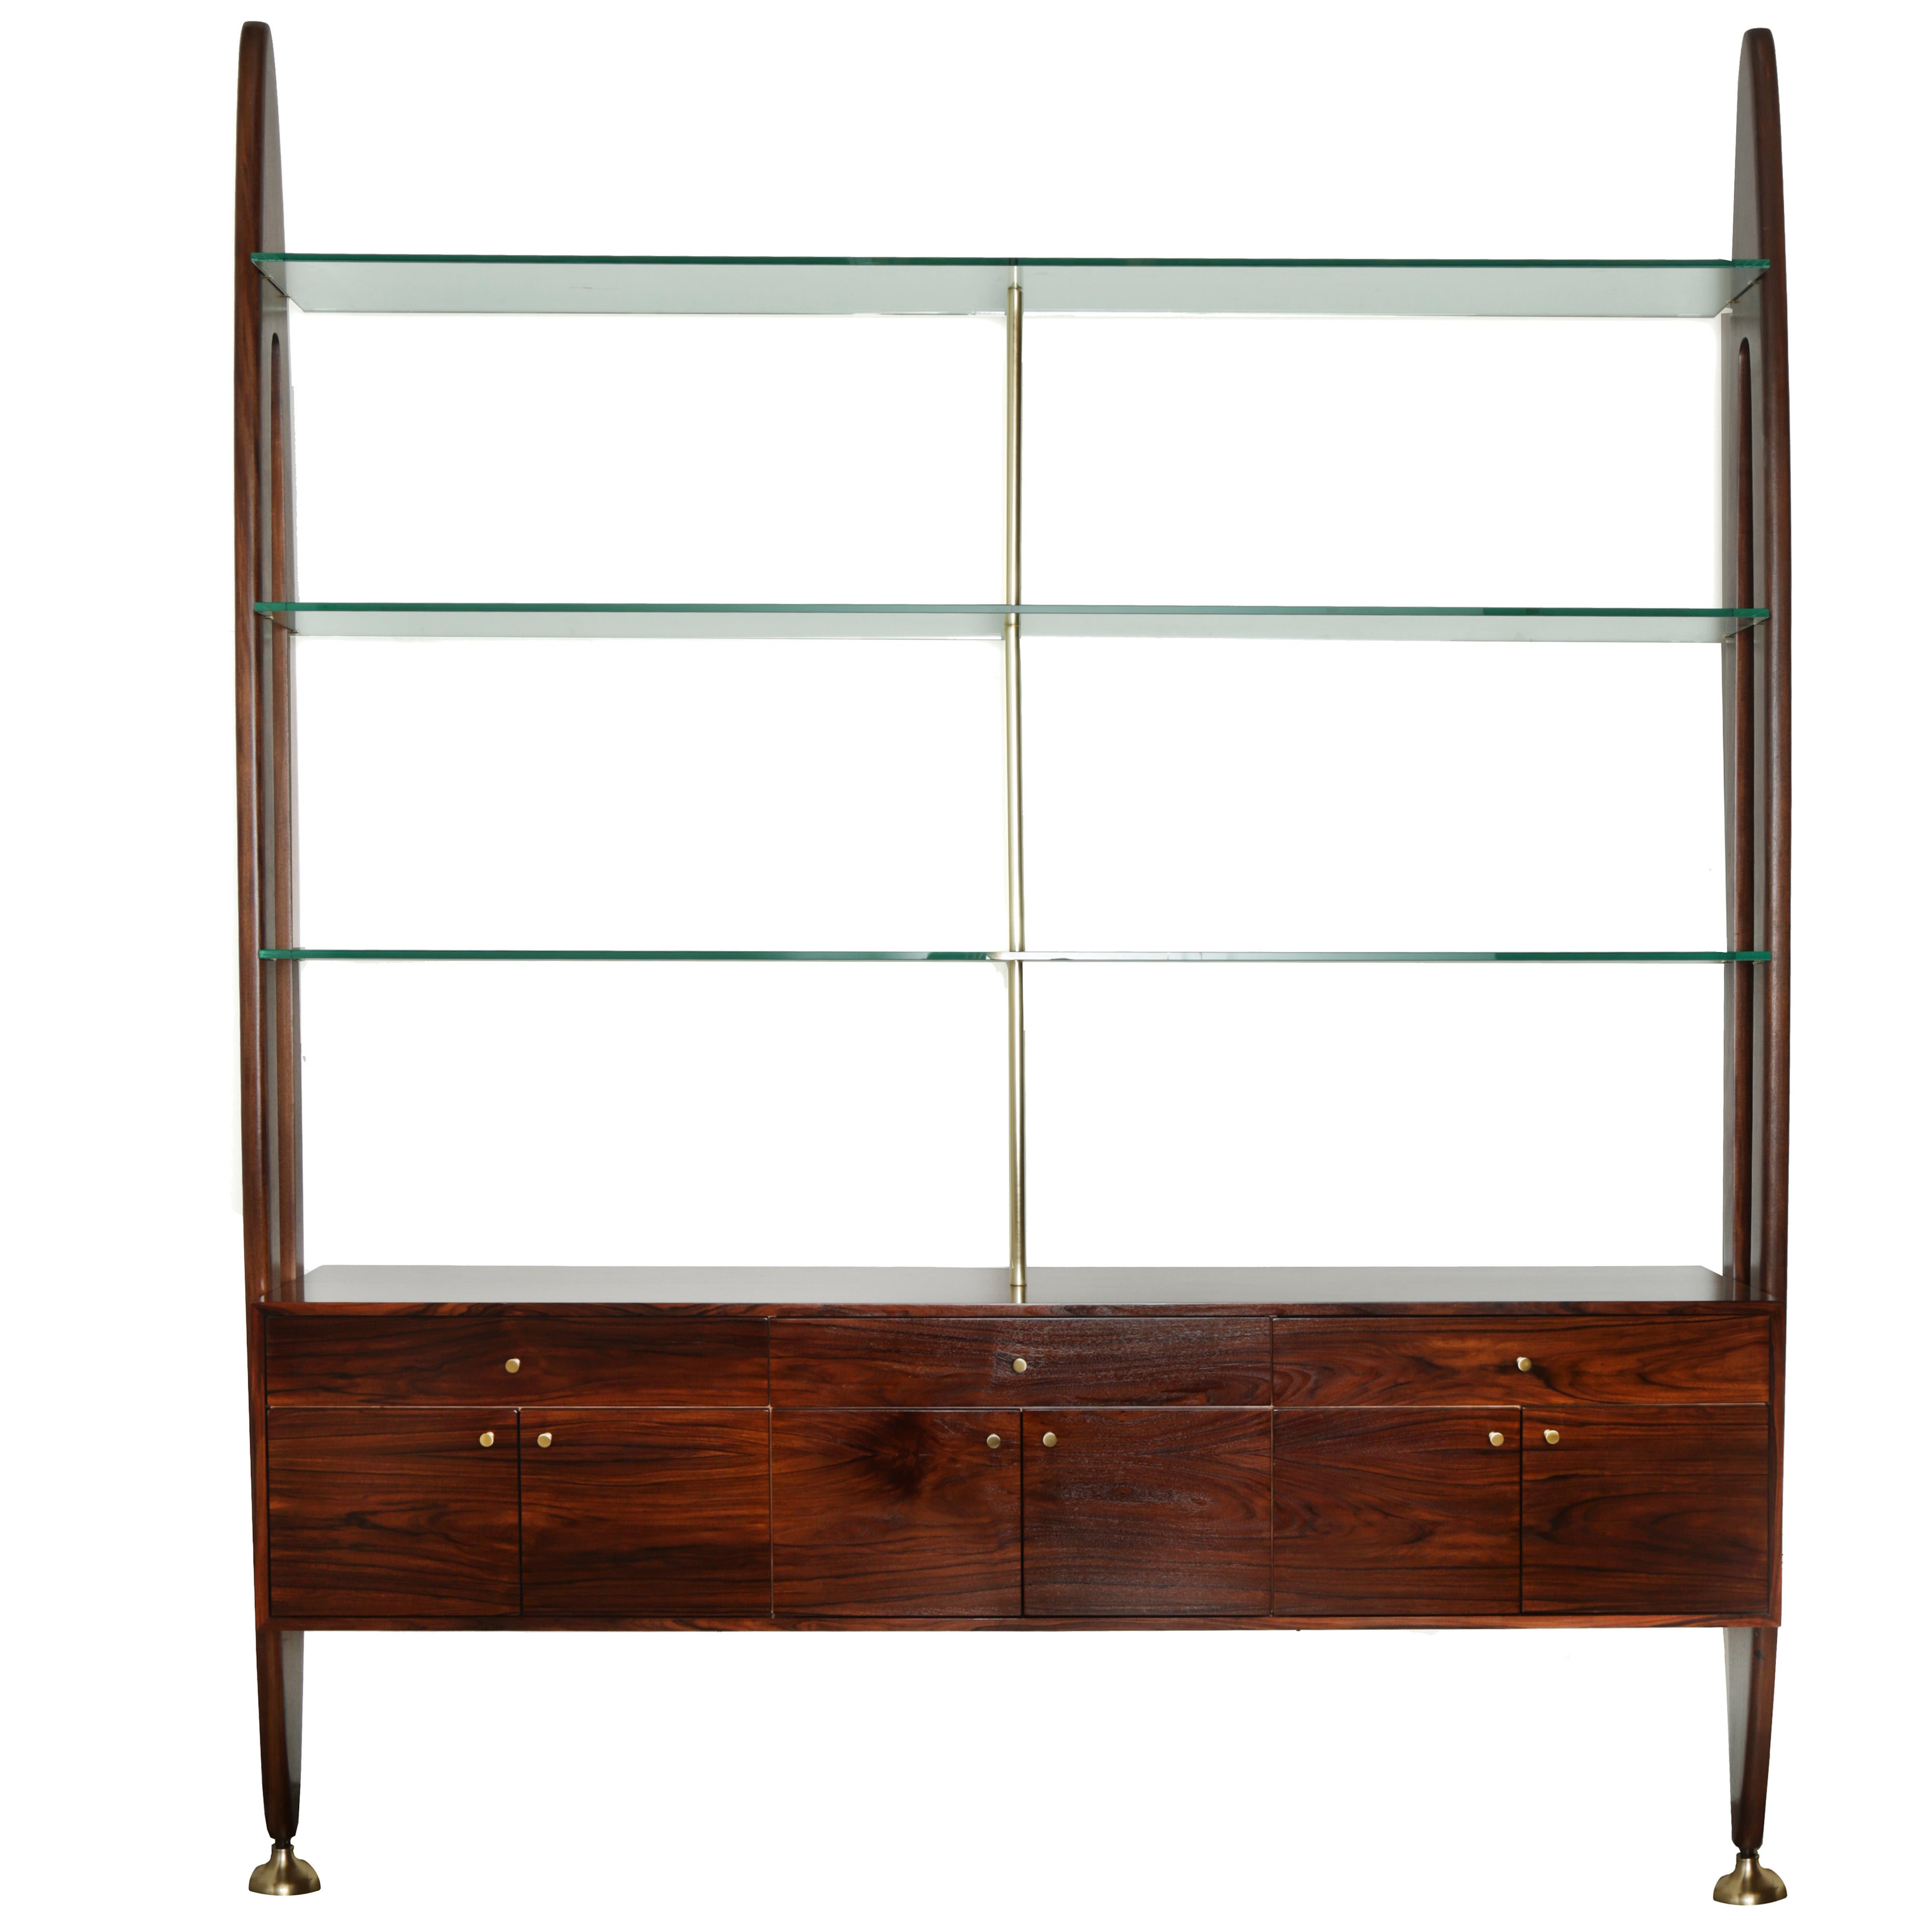 Brazilian Mid-Century Modern Exotic Hardwood Wall Unit with Glass Shelves For Sale